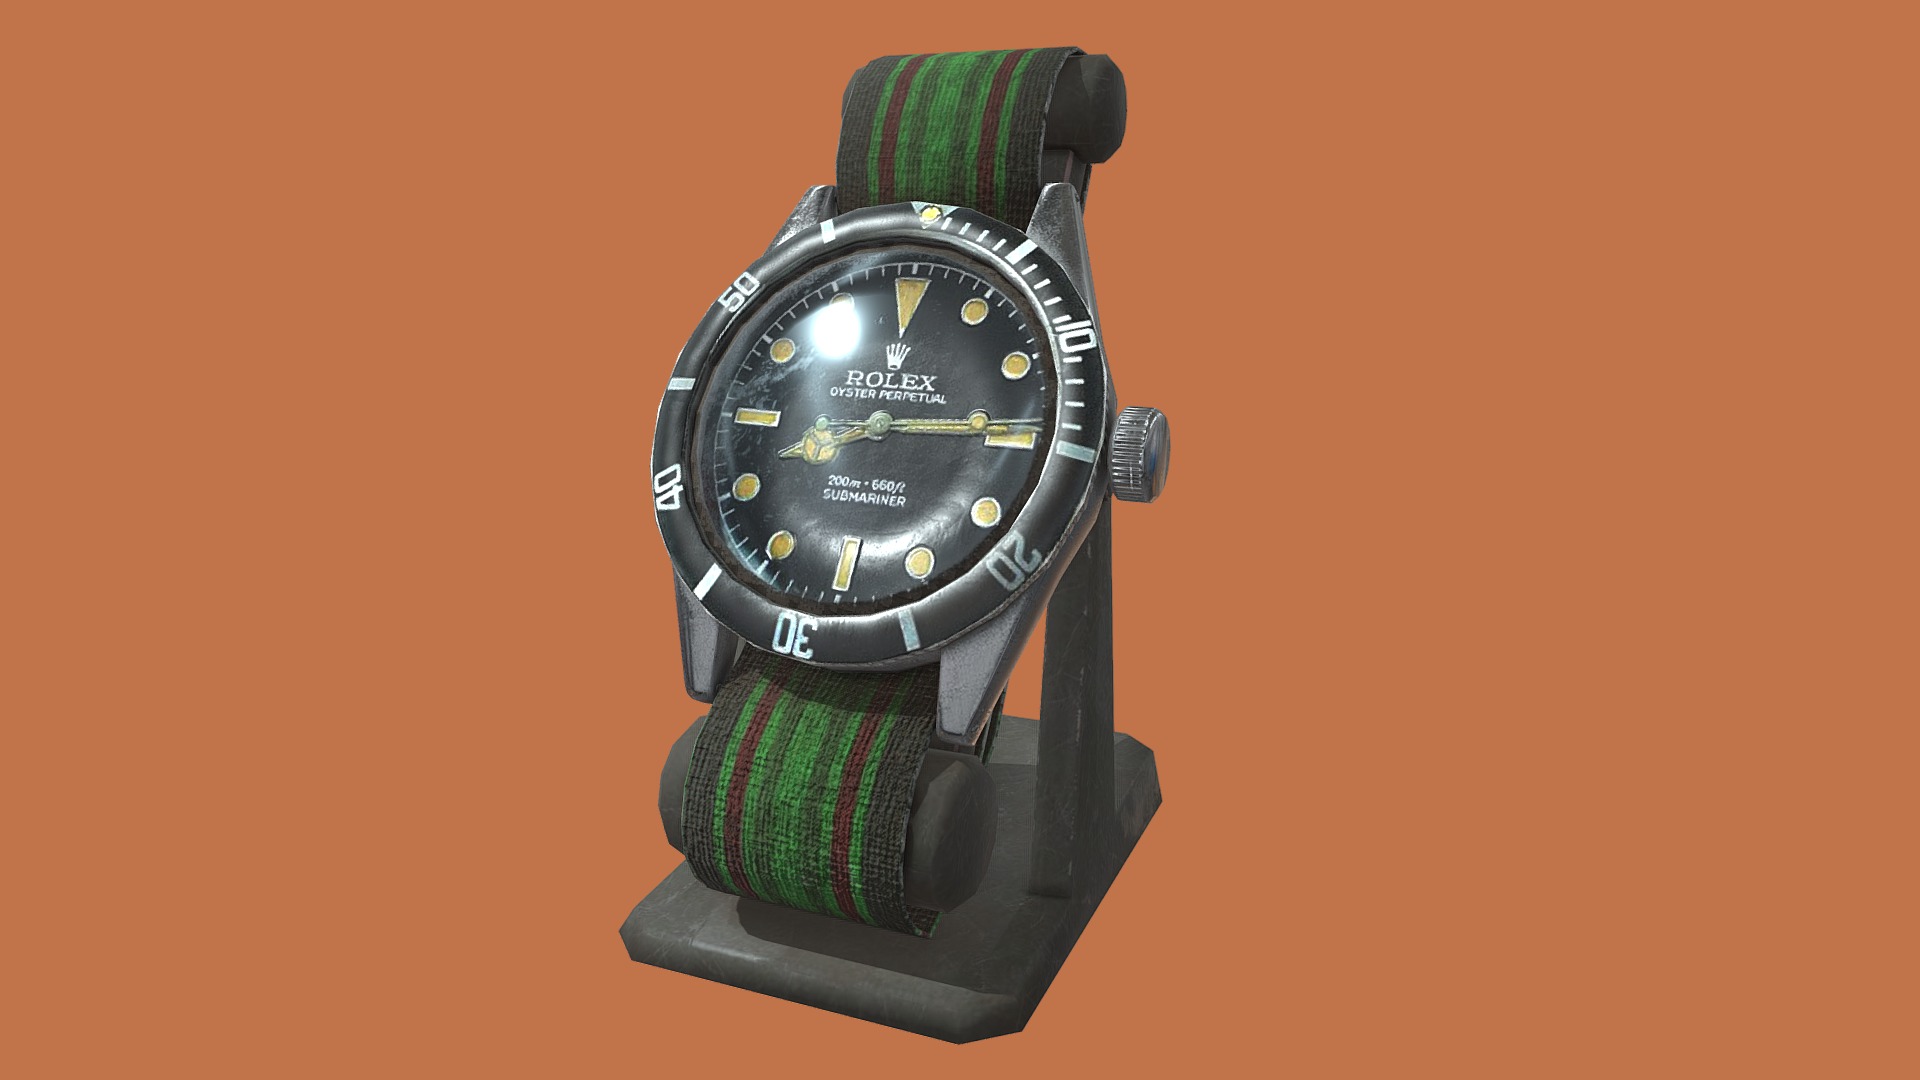 3D model Rolex Submariner - This is a 3D model of the Rolex Submariner. The 3D model is about a watch on a wrist.